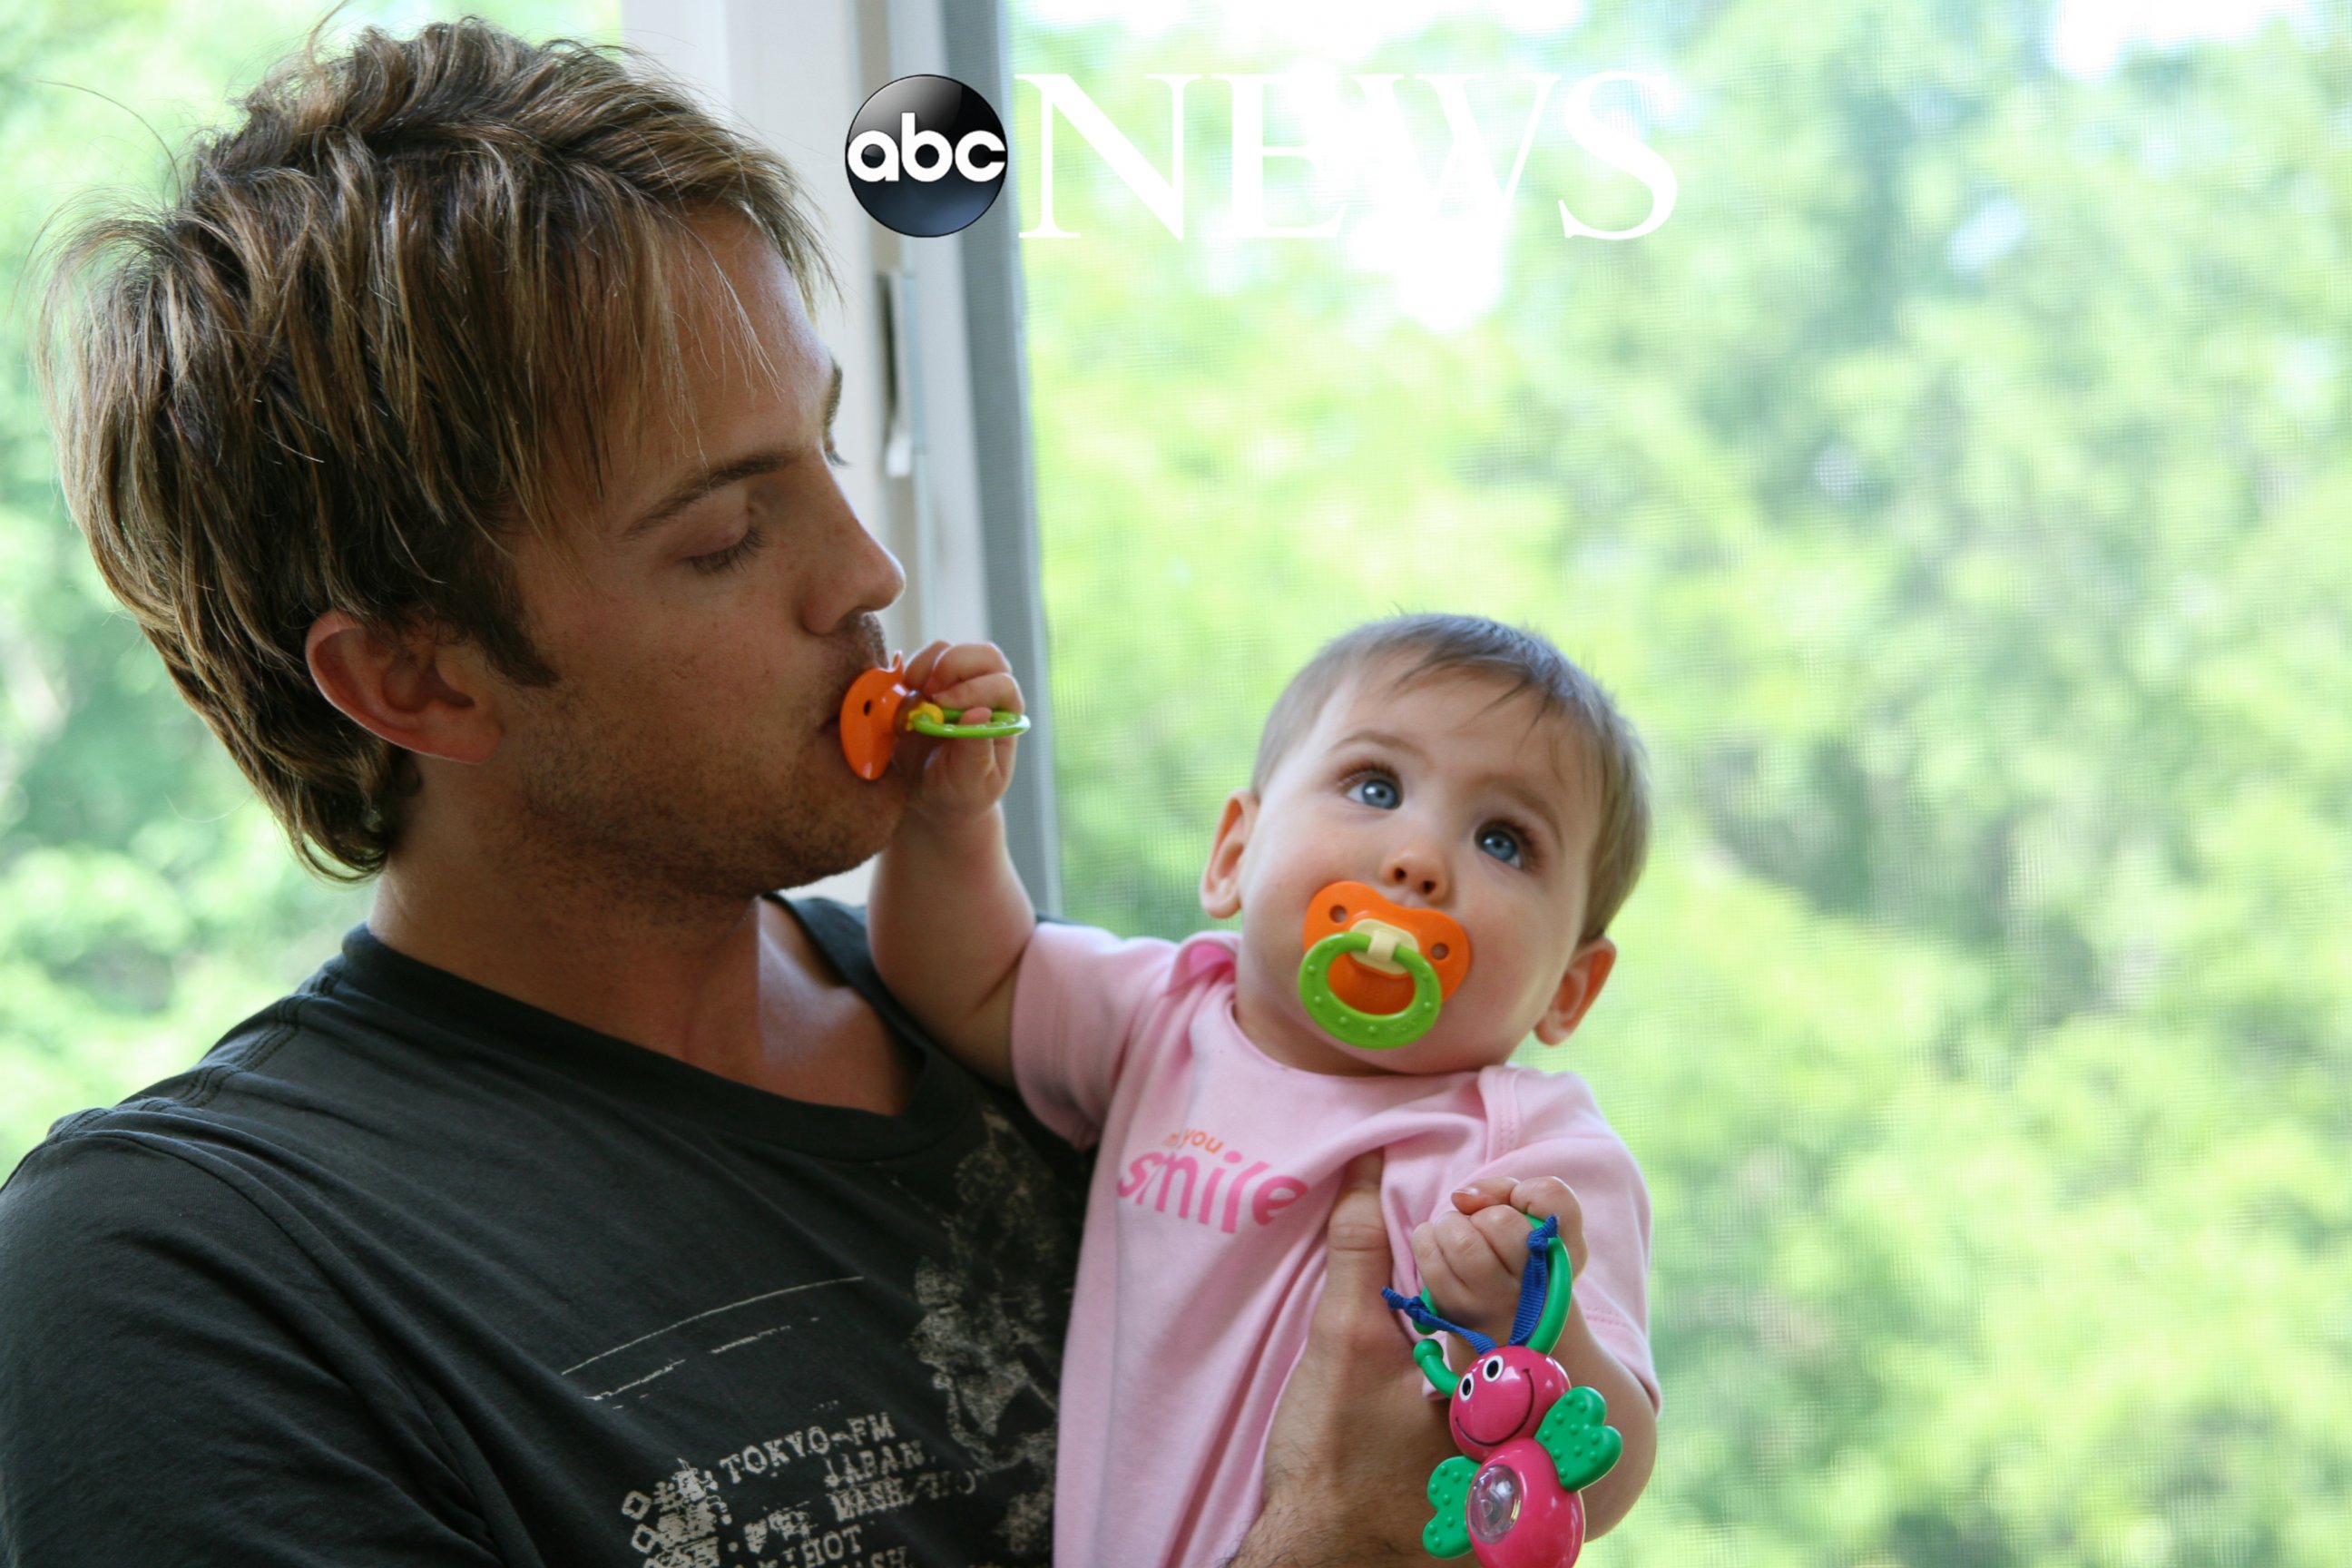 PHOTO: Larry Birkhead had a romantic relationship with Anna Nicole Smith but ended up going to court in an epic custody battle for thier daughter, Dannielynn Birkhead, shown here in this photo from May 2007.